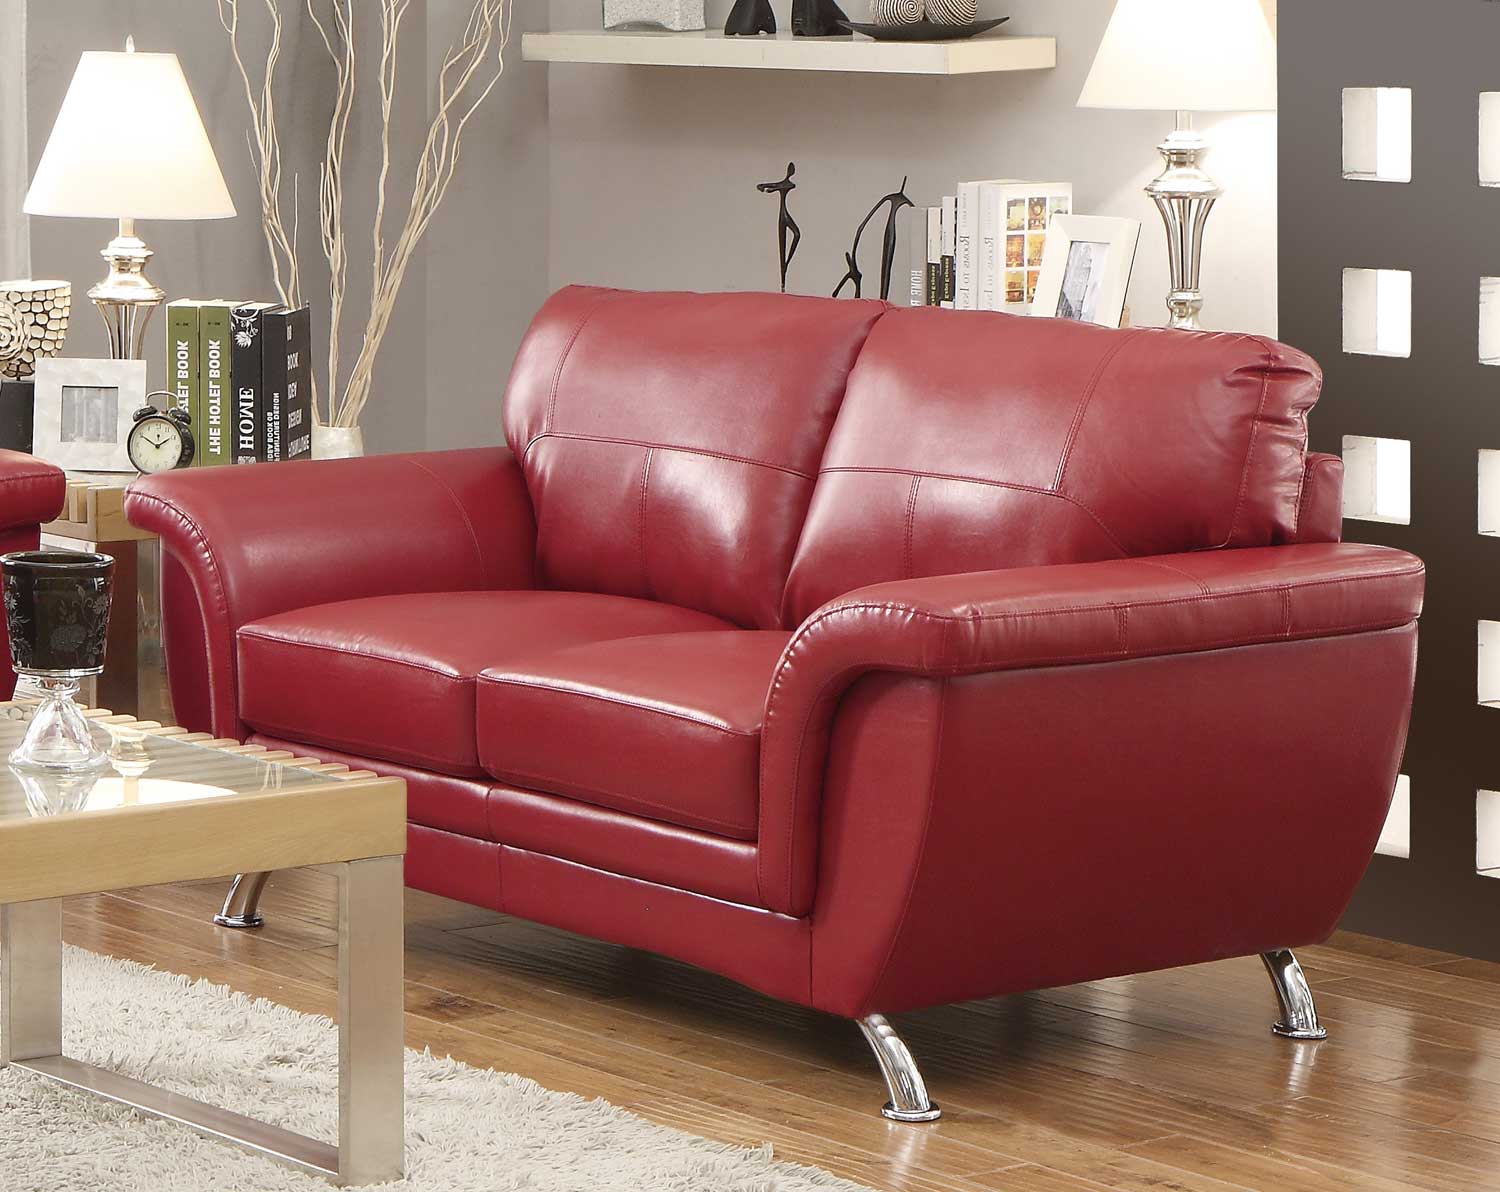 Homelegance Chaska Love Seat - Red Bonded Leather Match